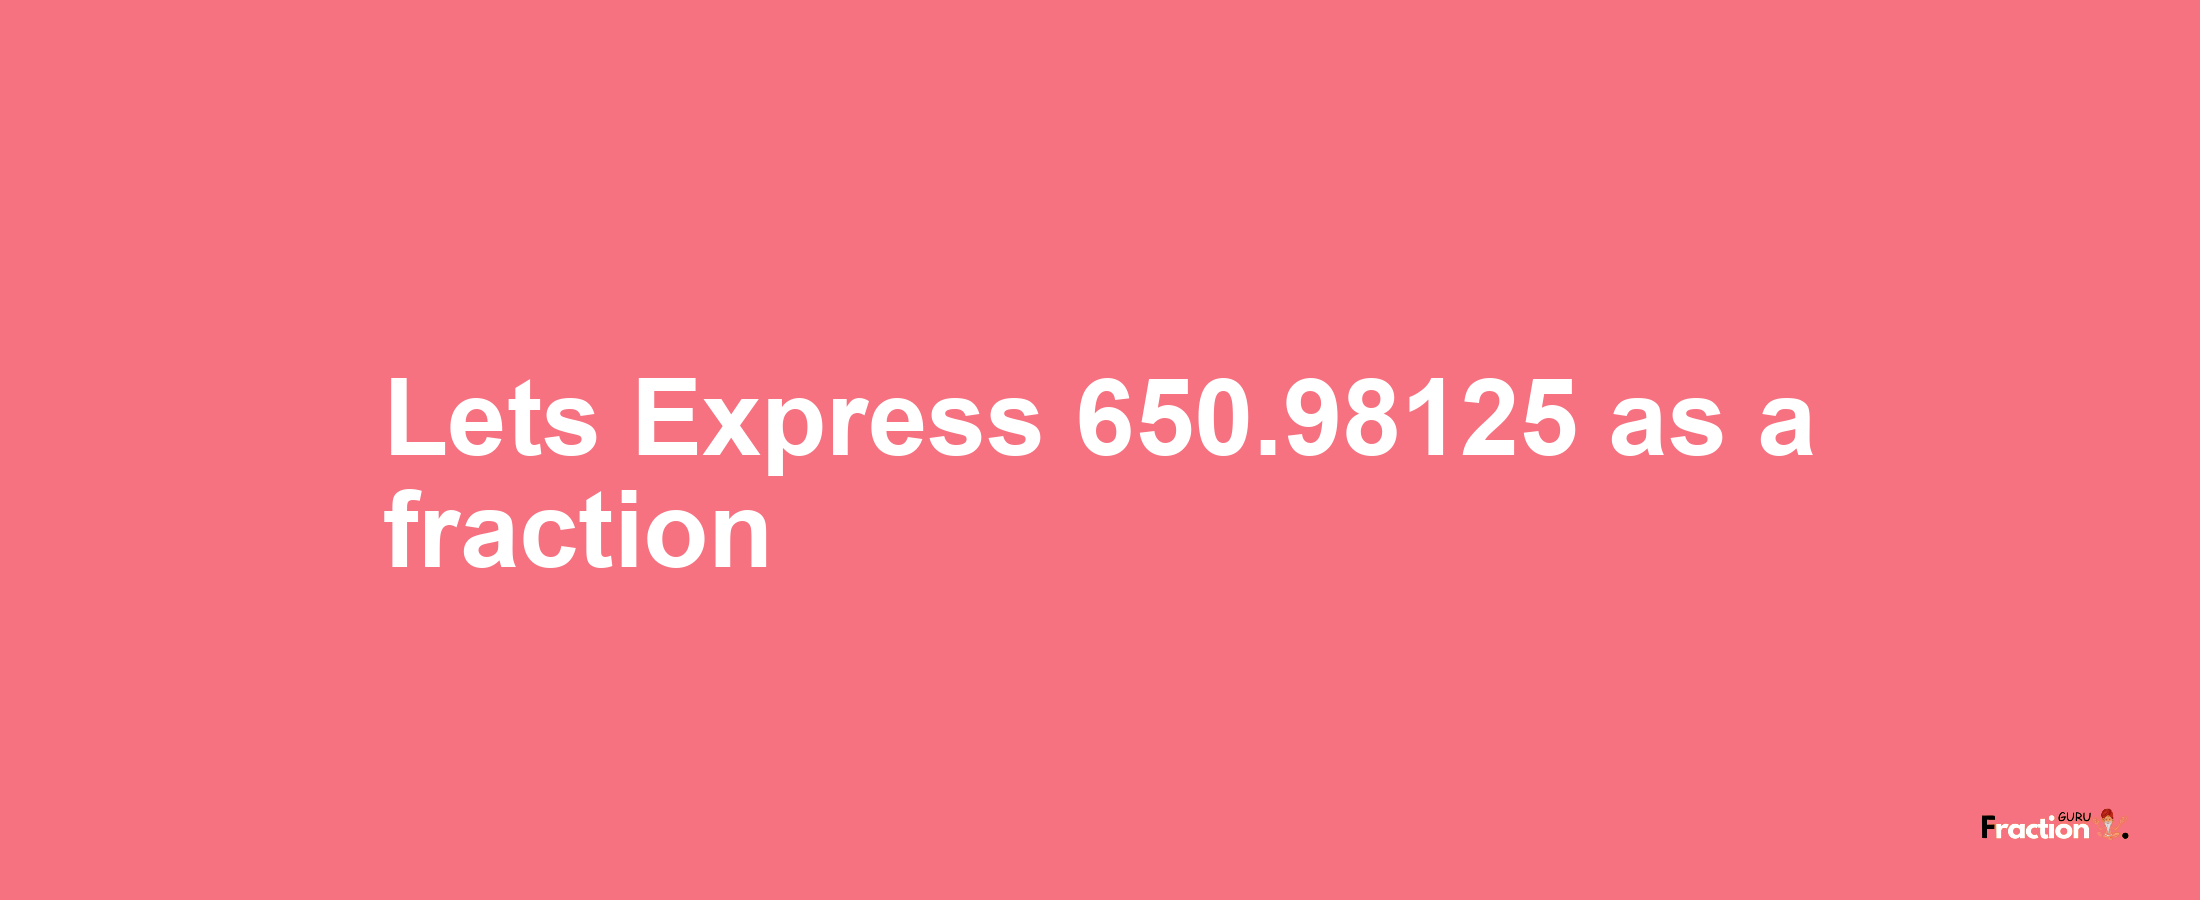 Lets Express 650.98125 as afraction